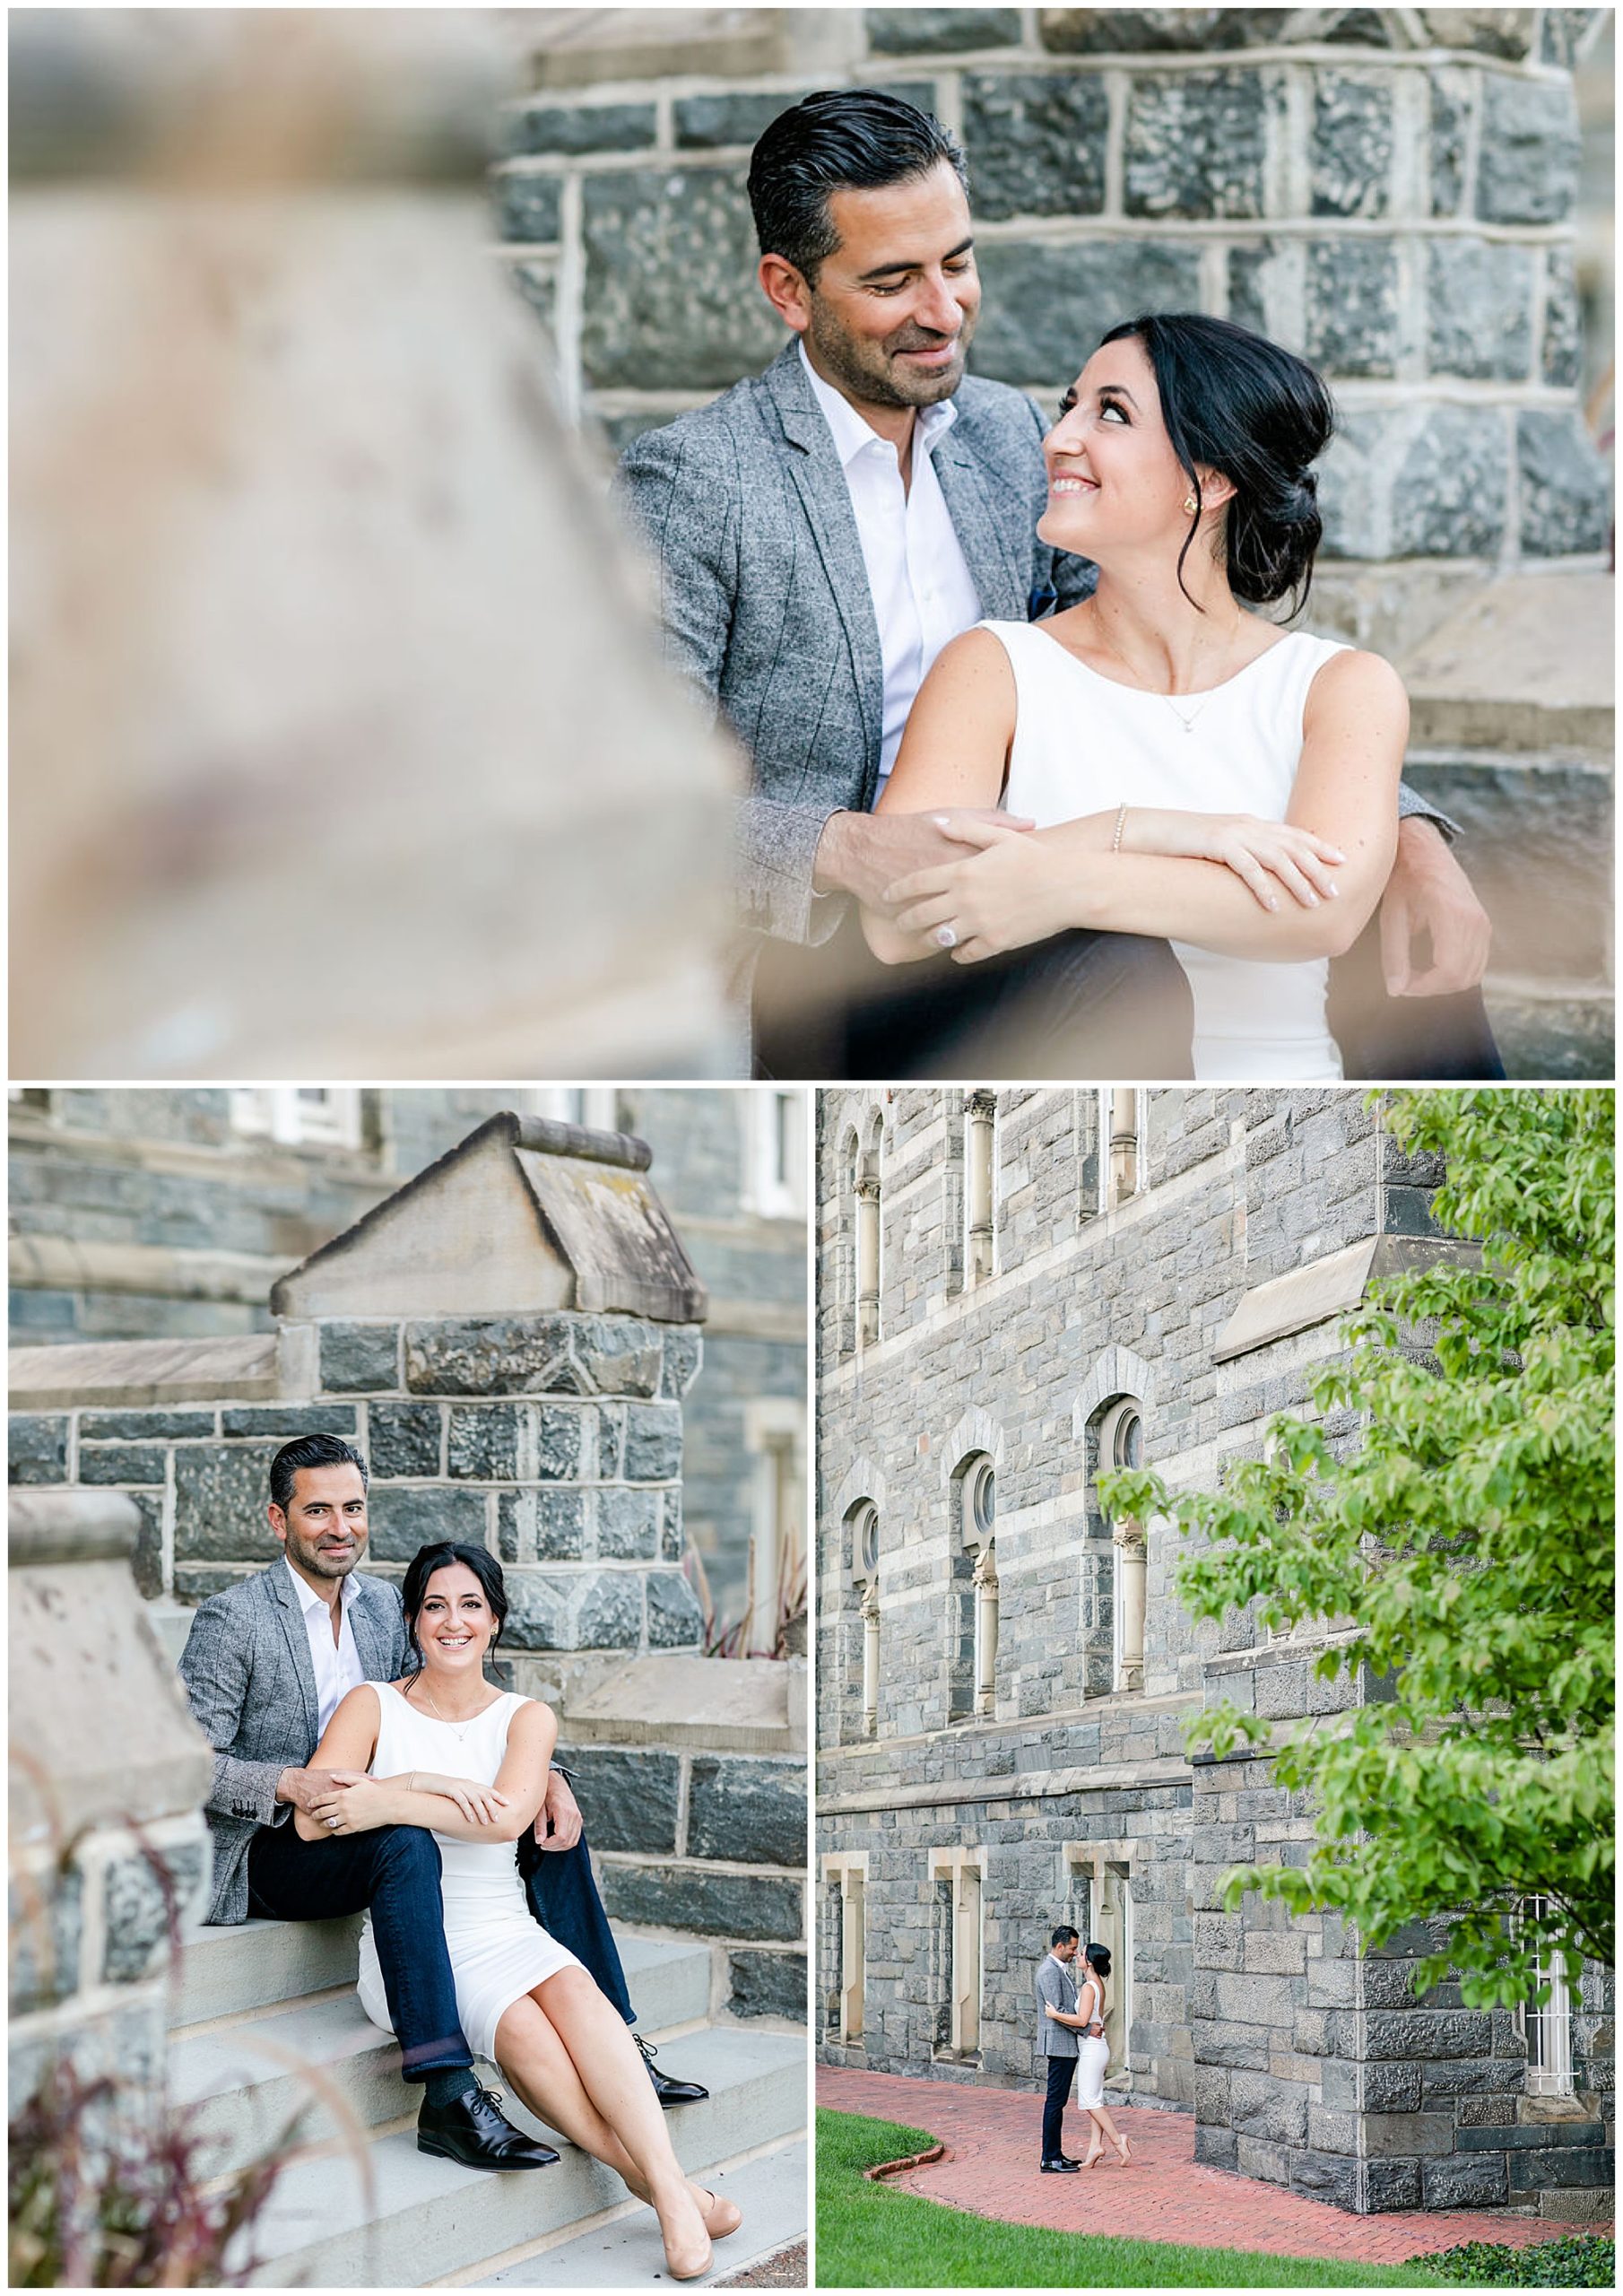 classic Georgetown engagement photos, Washington DC engagement photos, DC engagement photographer, Washington DC wedding photographer, classic engagement photos, white body con dress, semi-formal engagement photos, summer portraits, DC portraits, Rachel E.H. Photography, couple sitting on steps